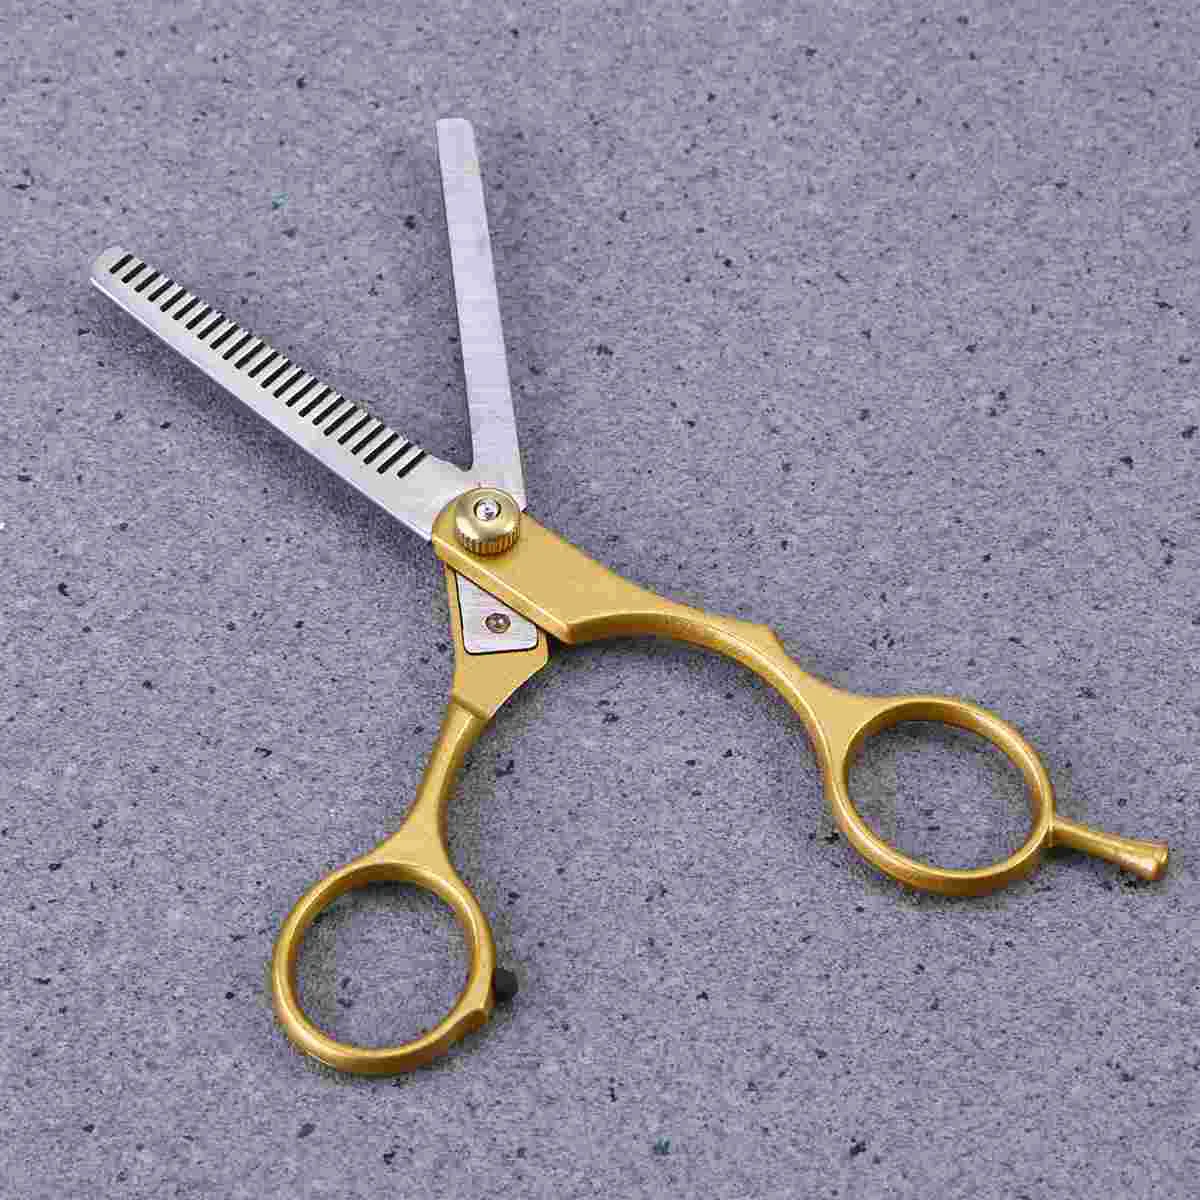 

Scissor Thinning Hair Shear Shears Scissors Hairdressing Barber Styling Cutting Kit Texturing Professional Stylist Trimming Mens